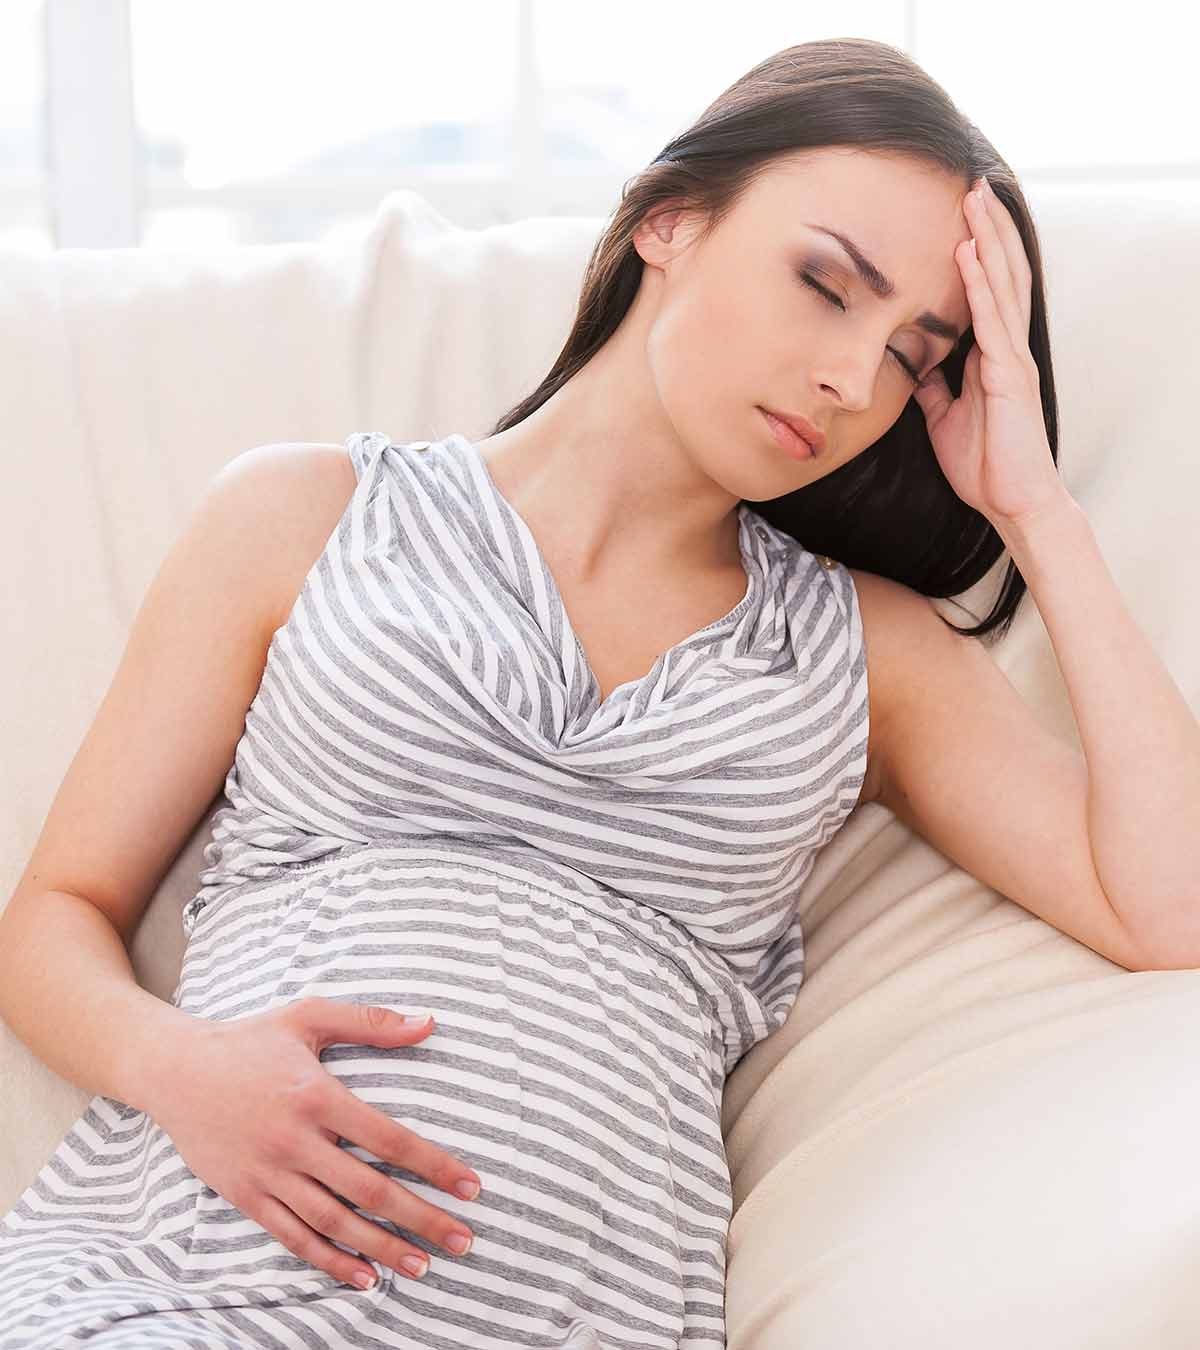 6 Causes Of Mood Swings During Pregnancy And Tips To Manage